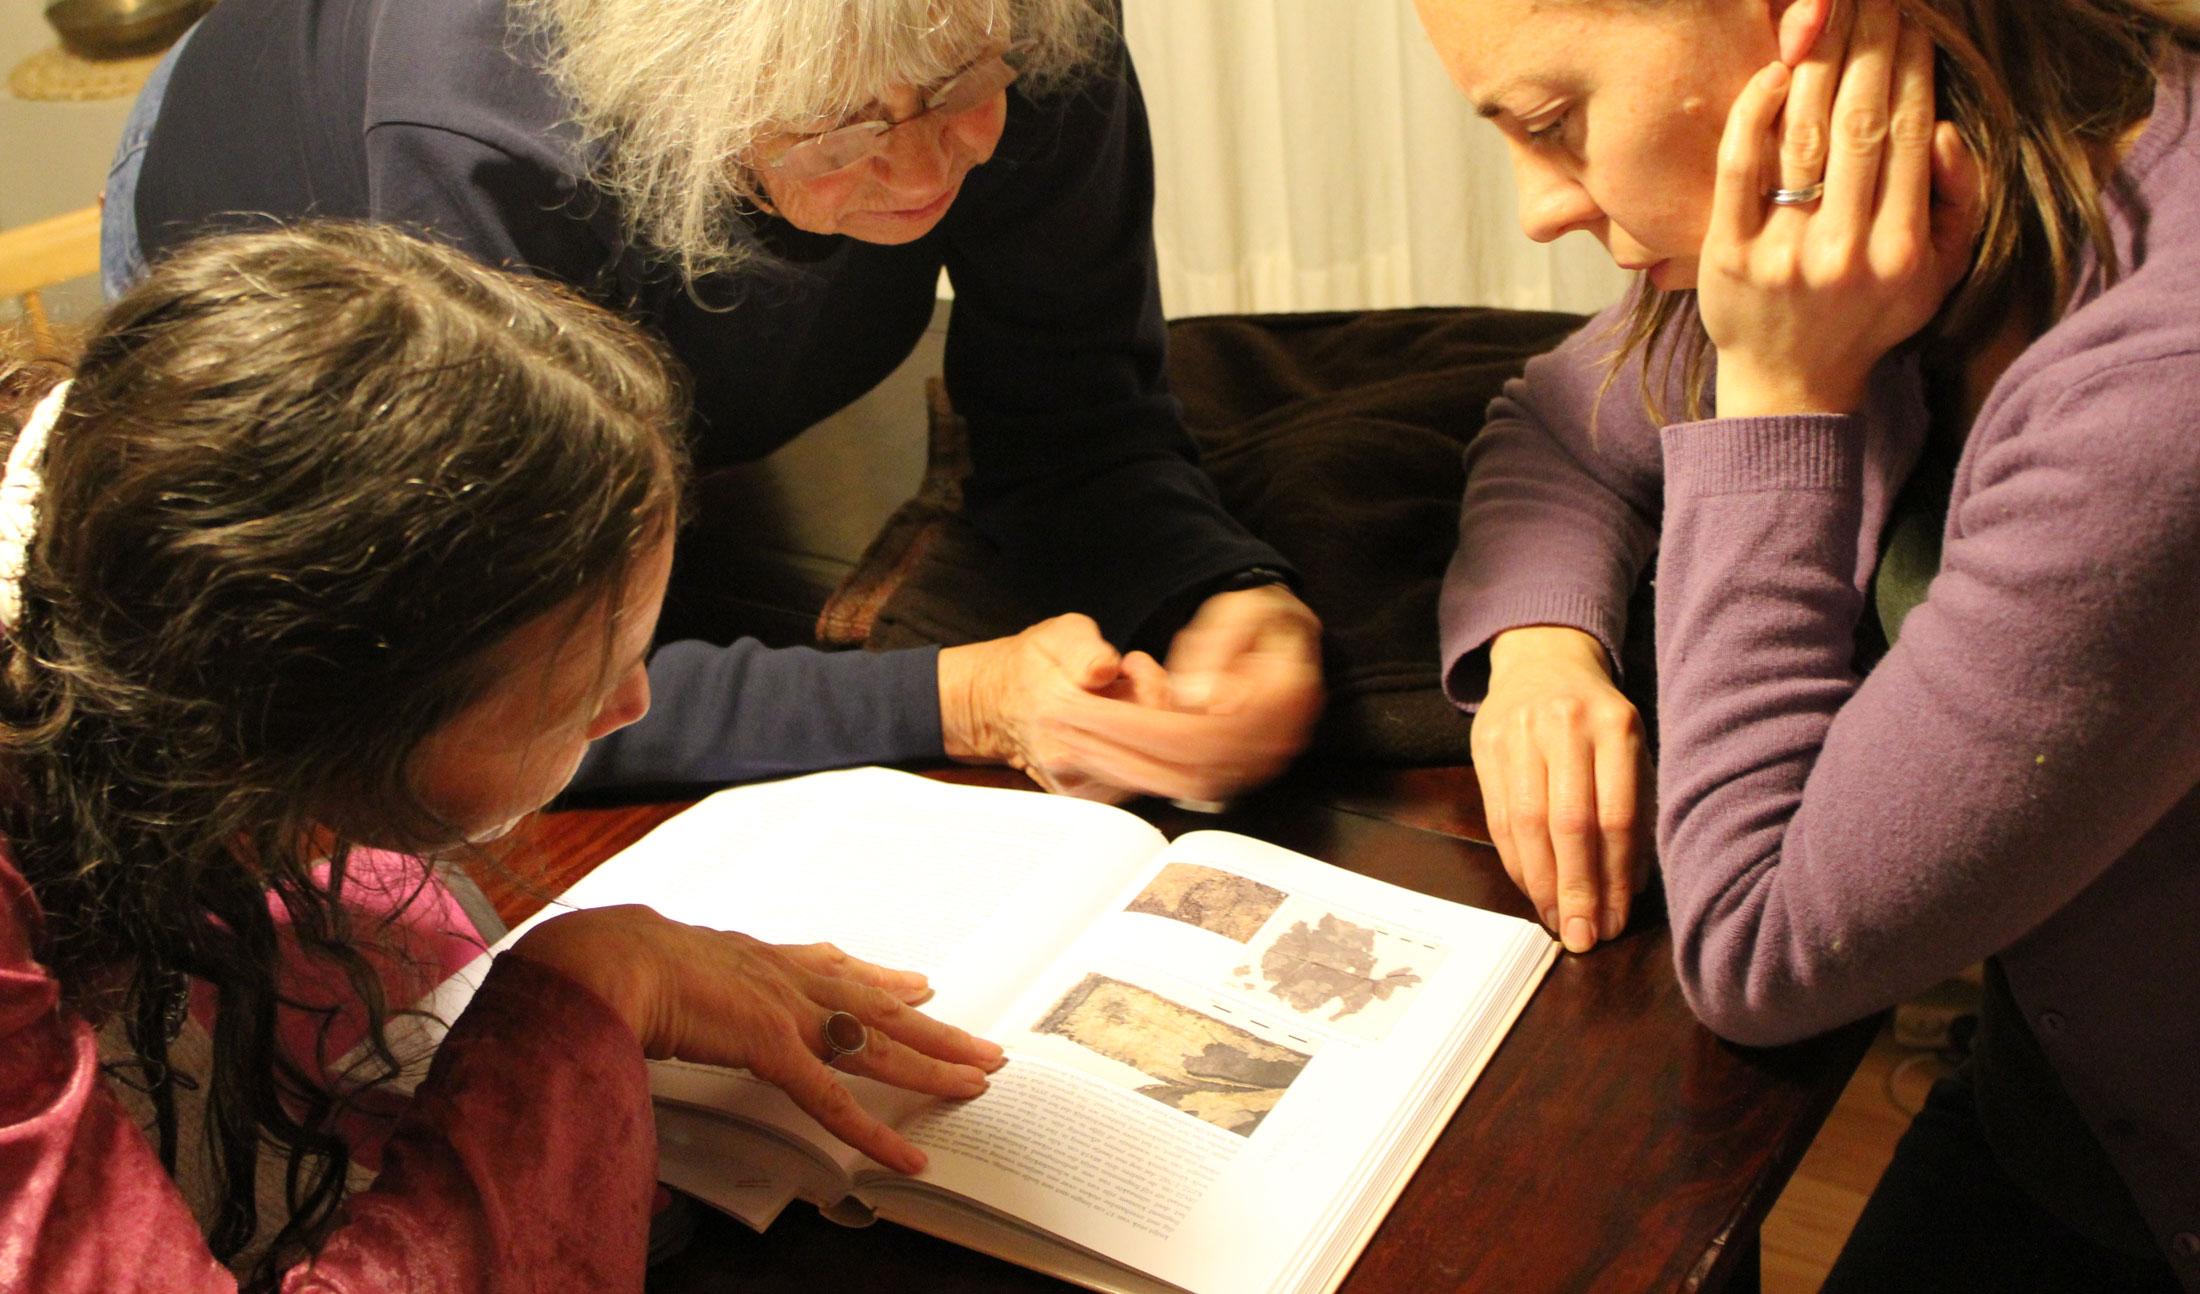 Hanna Zimmerman (centre) with ‘The Tudor Child’ author Jane Huggett (left) and Ninya (right) discussing textile finds in ‘Textiel in Context’